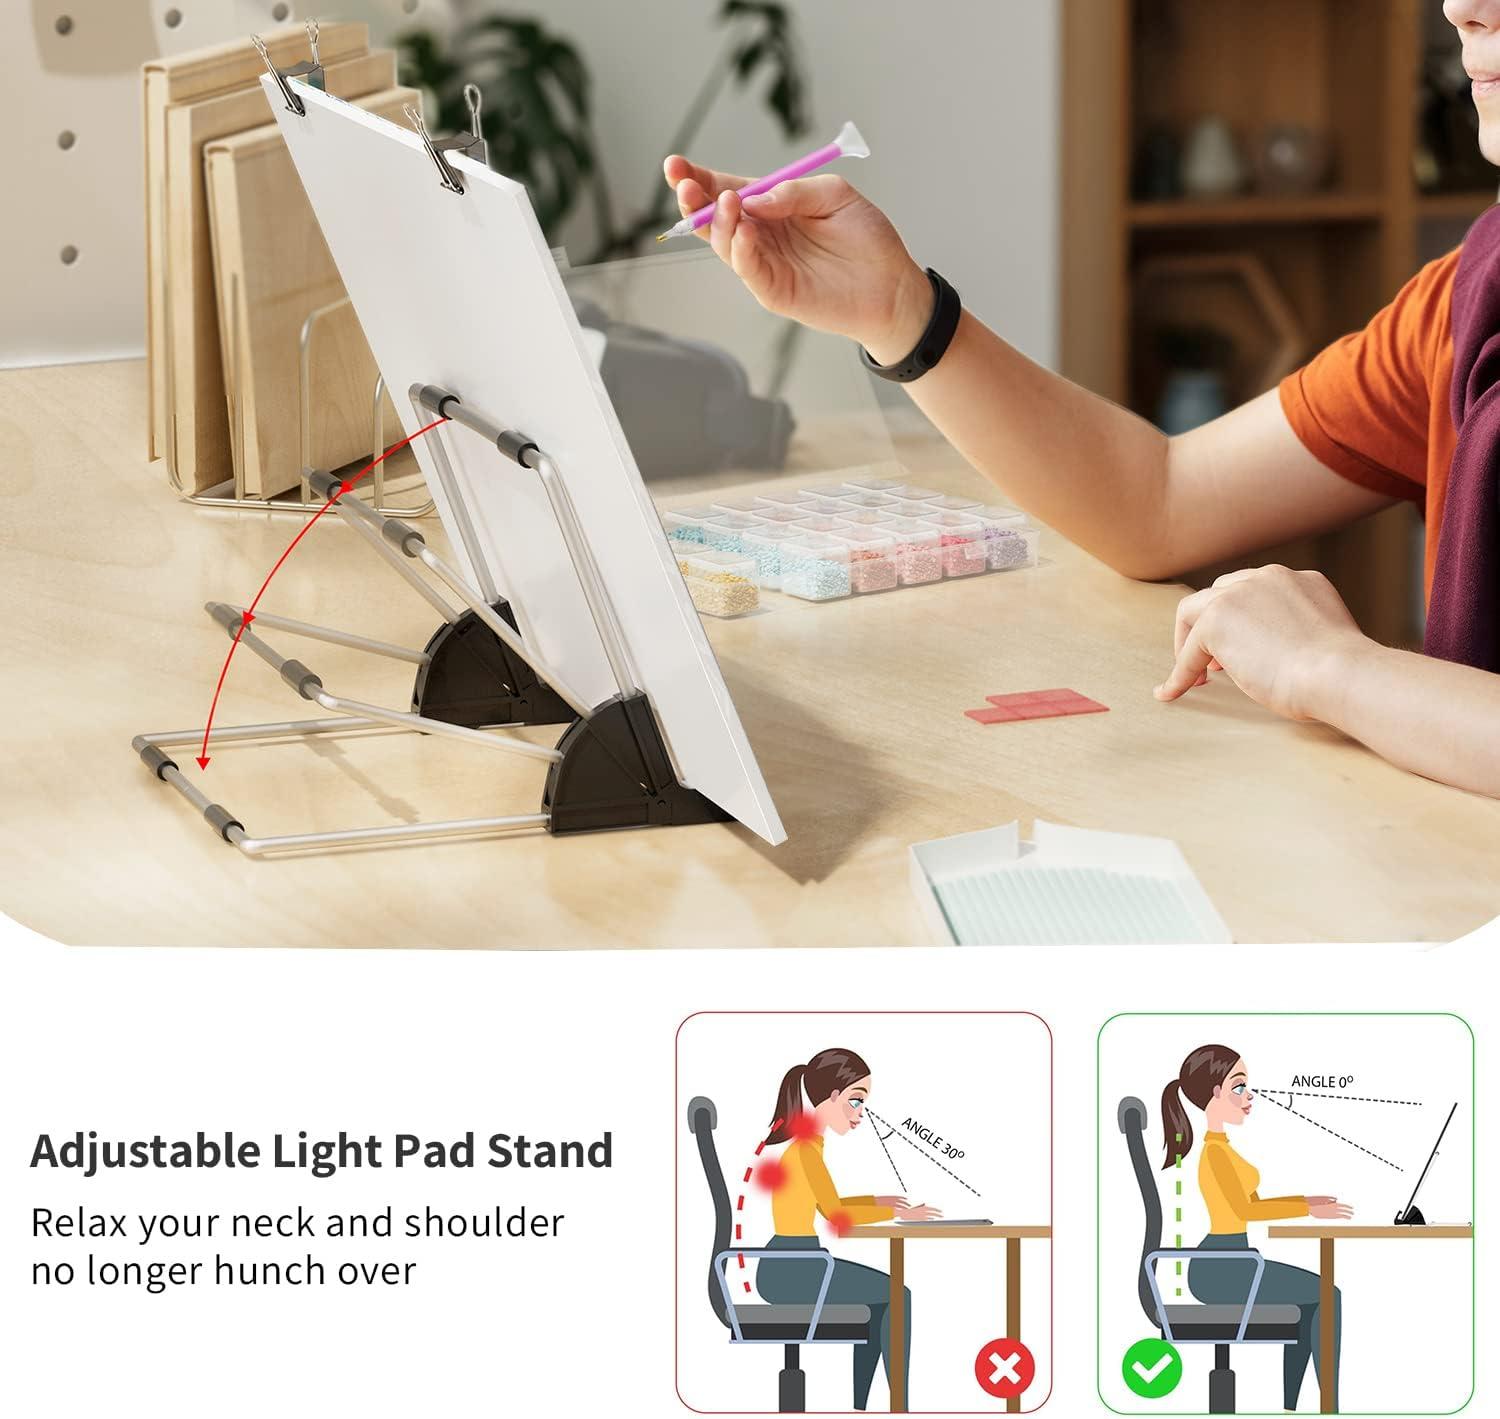 A4 LED Light Board for Diamond Painting Kits, USB Powered Drawing